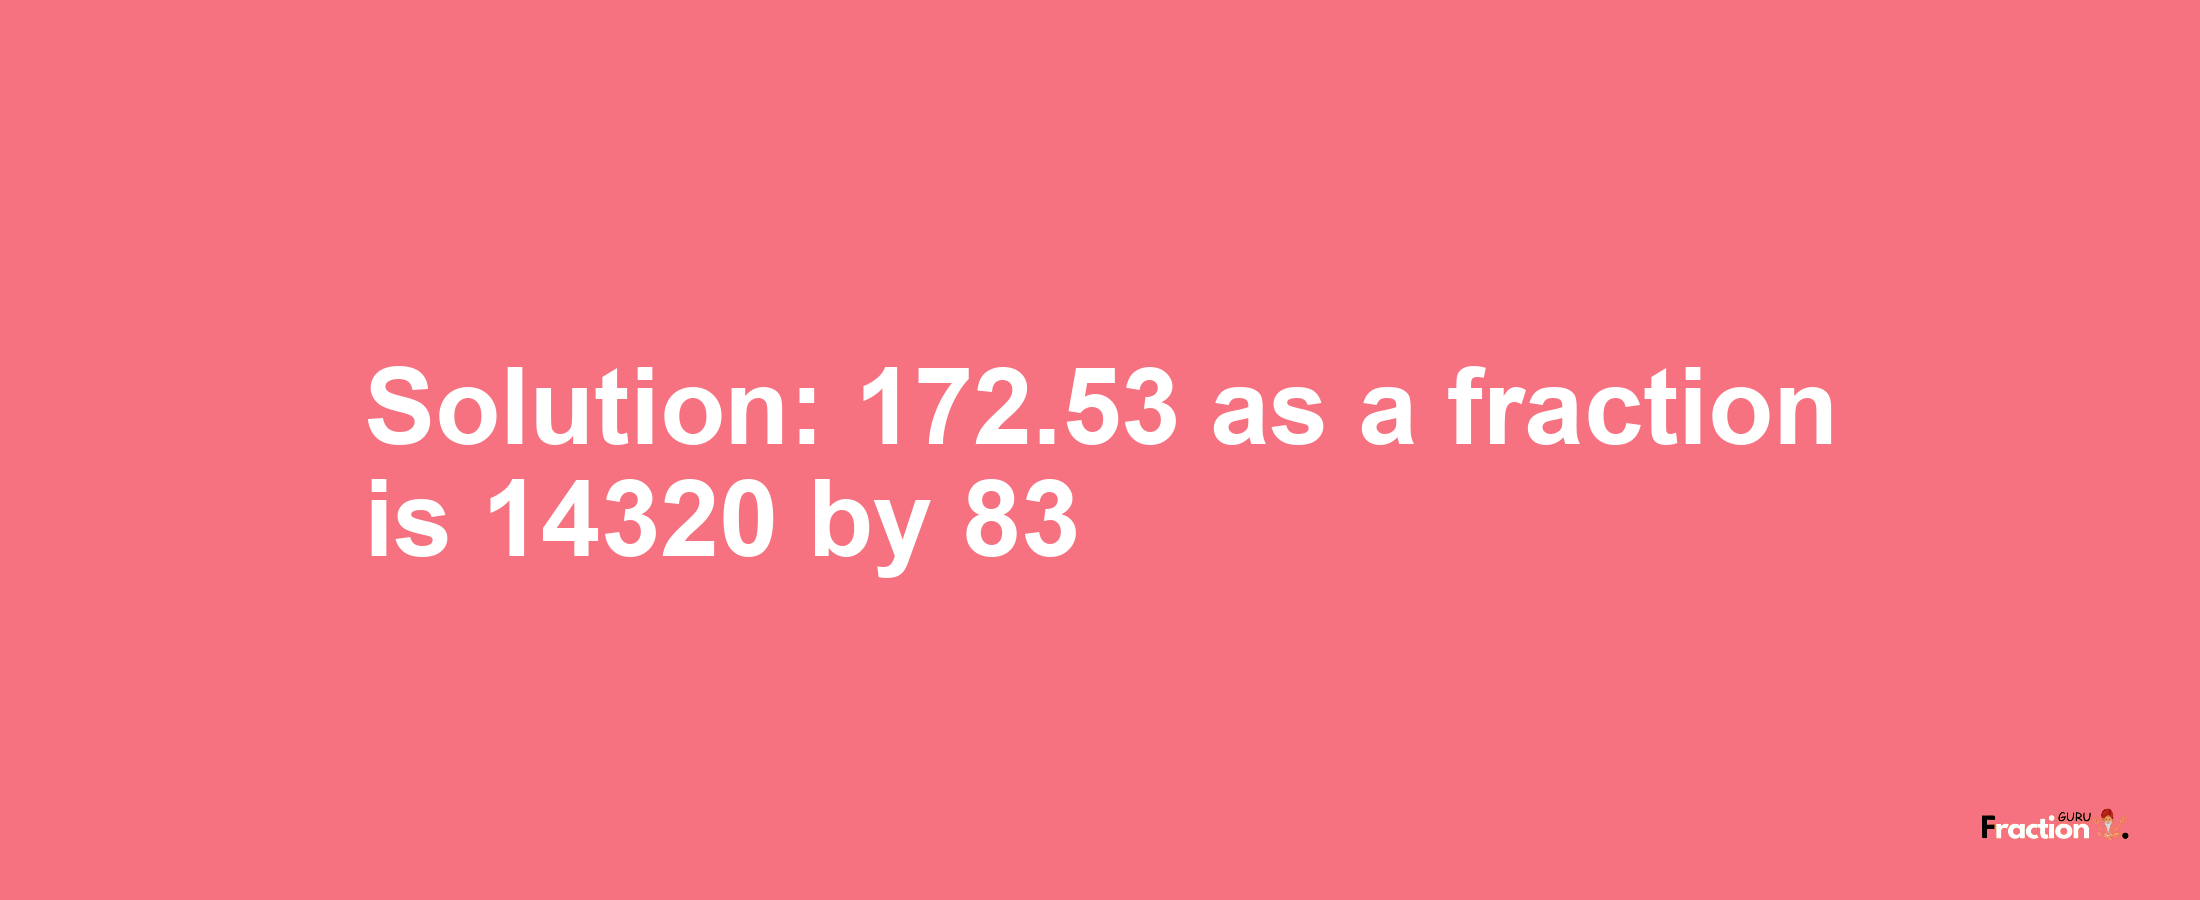 Solution:172.53 as a fraction is 14320/83